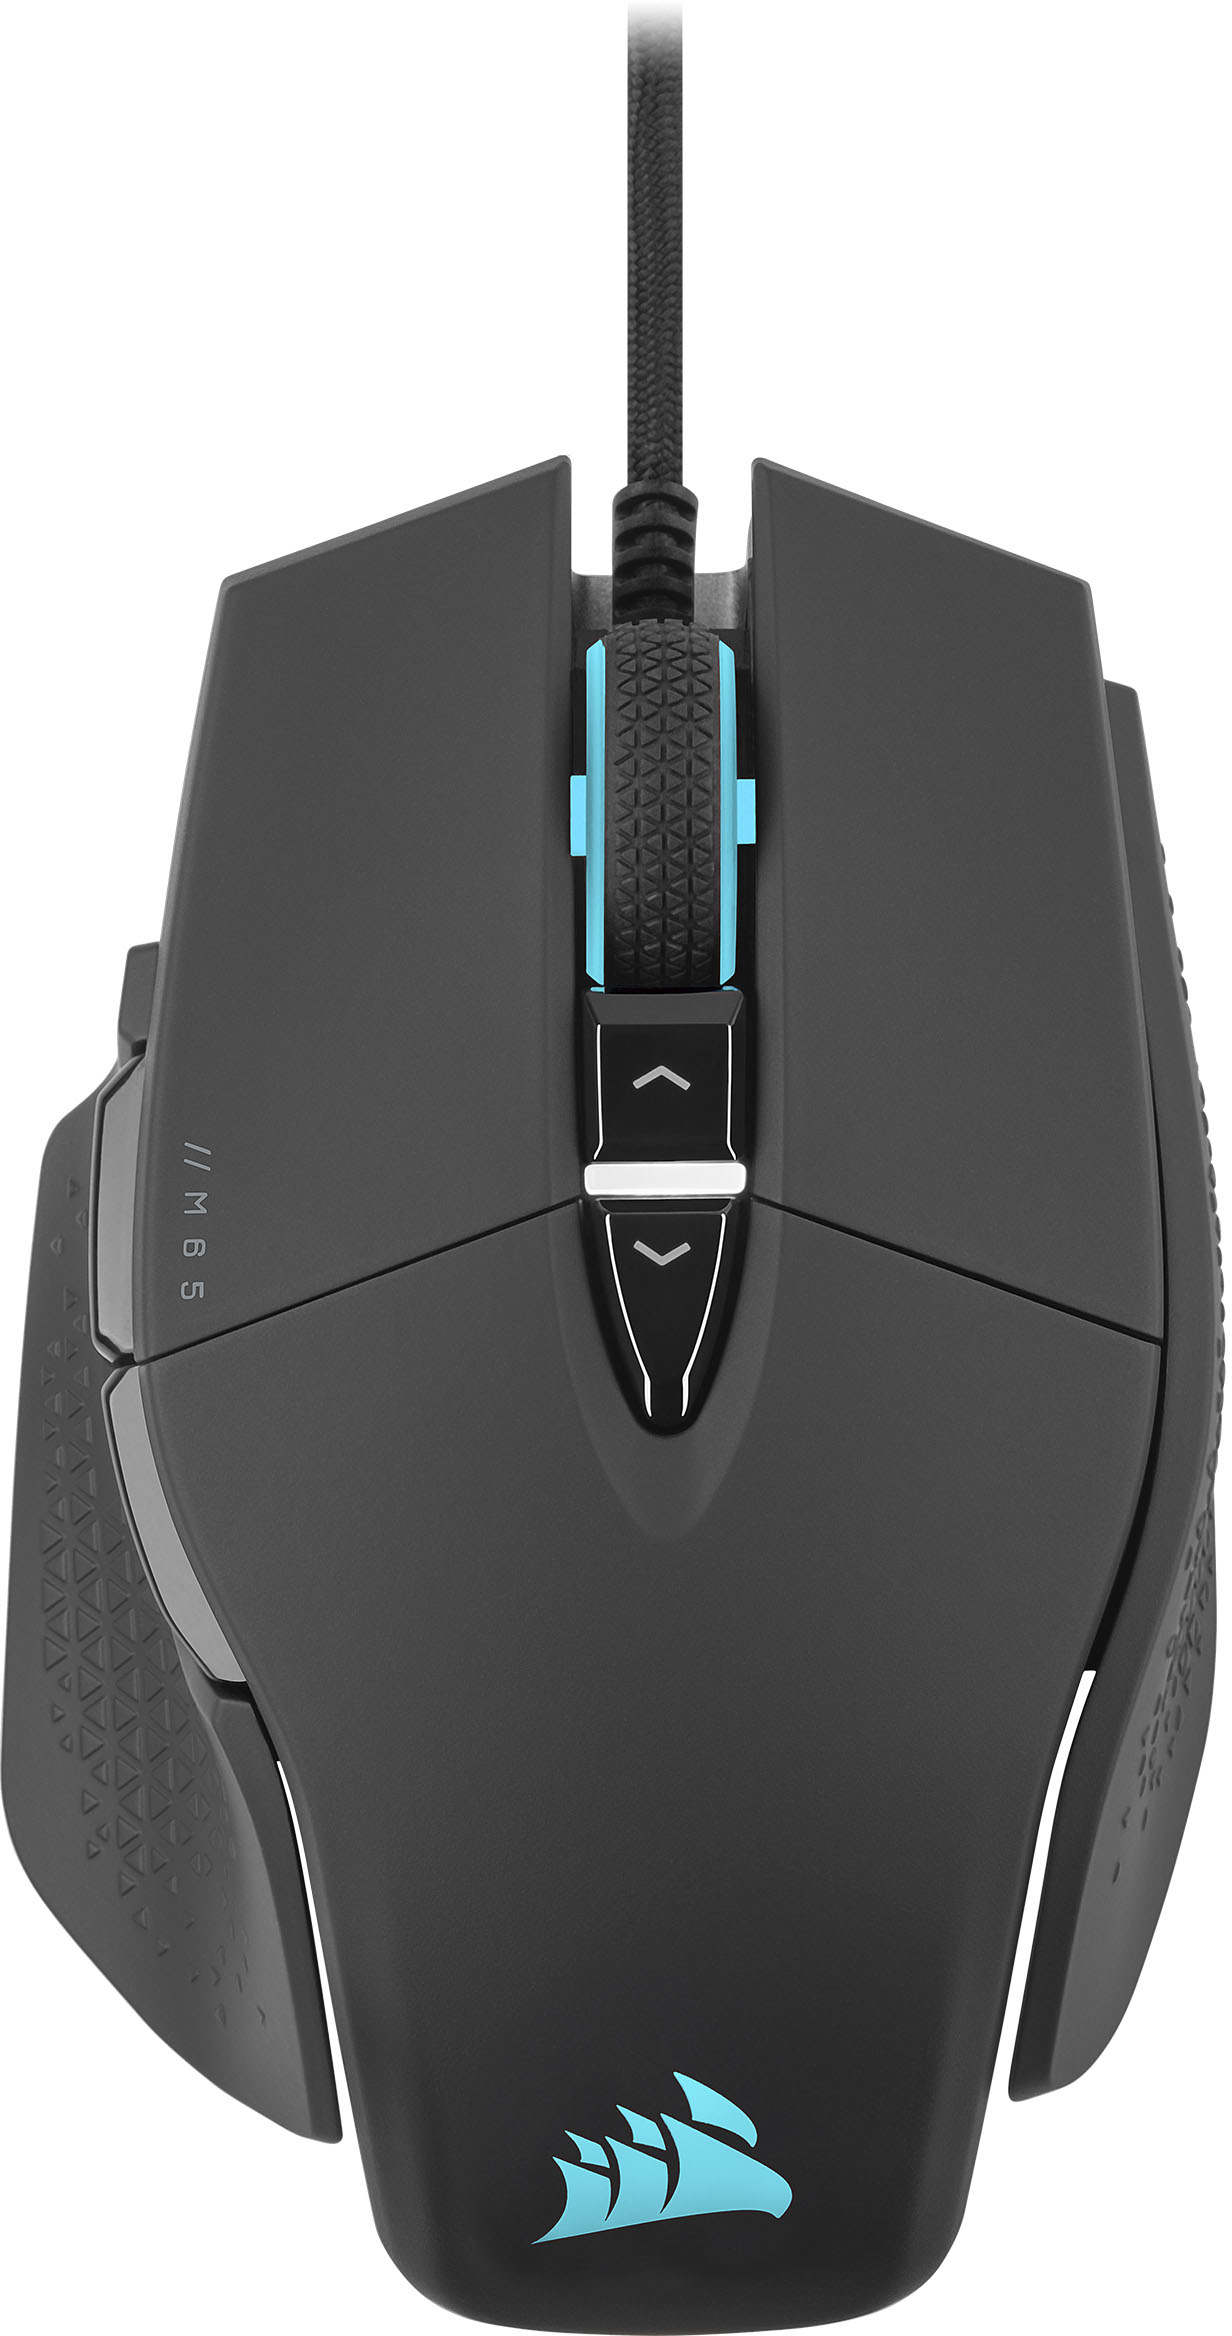 Præfiks dollar Centimeter CORSAIR M65 RGB Ultra Wired Optical Gaming Mouse with Adjustable Weights  Black CH-9309411-NA2 - Best Buy